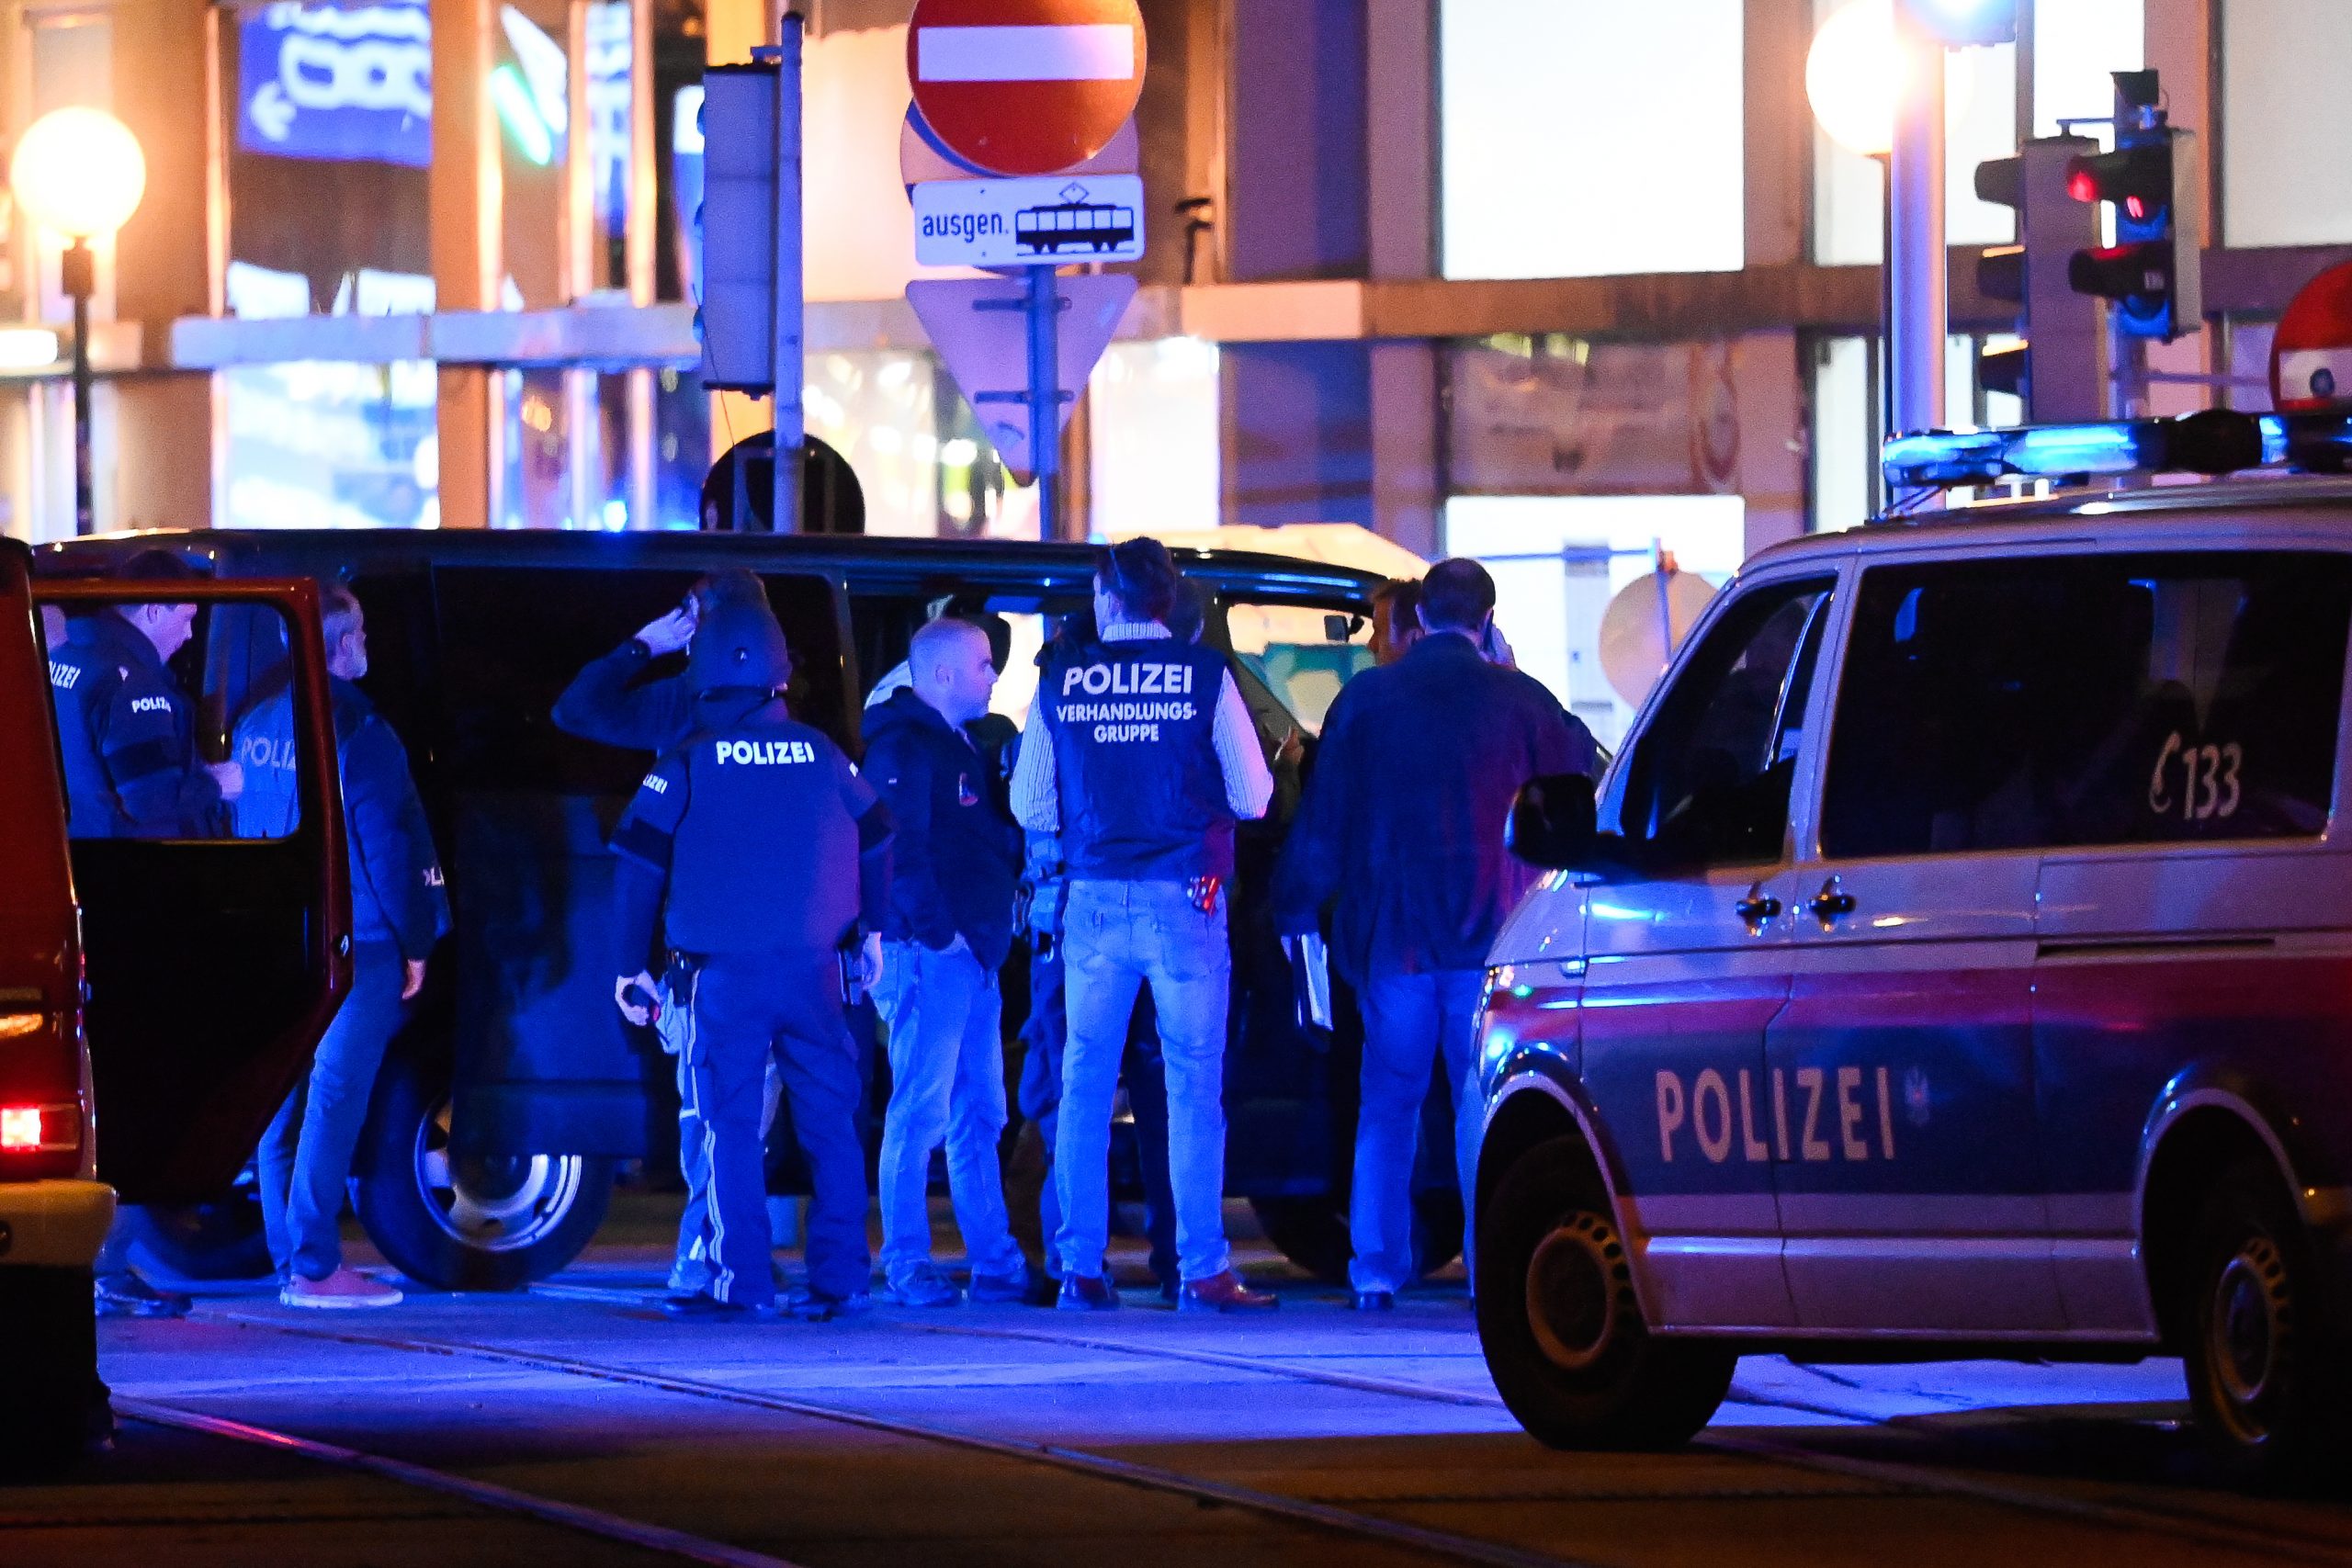 epa08793964 Austrian police arrives at the scene after a shooting near the 'Stadttempel' synagogue in Vienna, Austria, 02 November 2020. According to recent reports, at least one person is reported to have died and 3 are injured in what officials are treating as a terror attack.  EPA/CHRISTIAN BRUNA